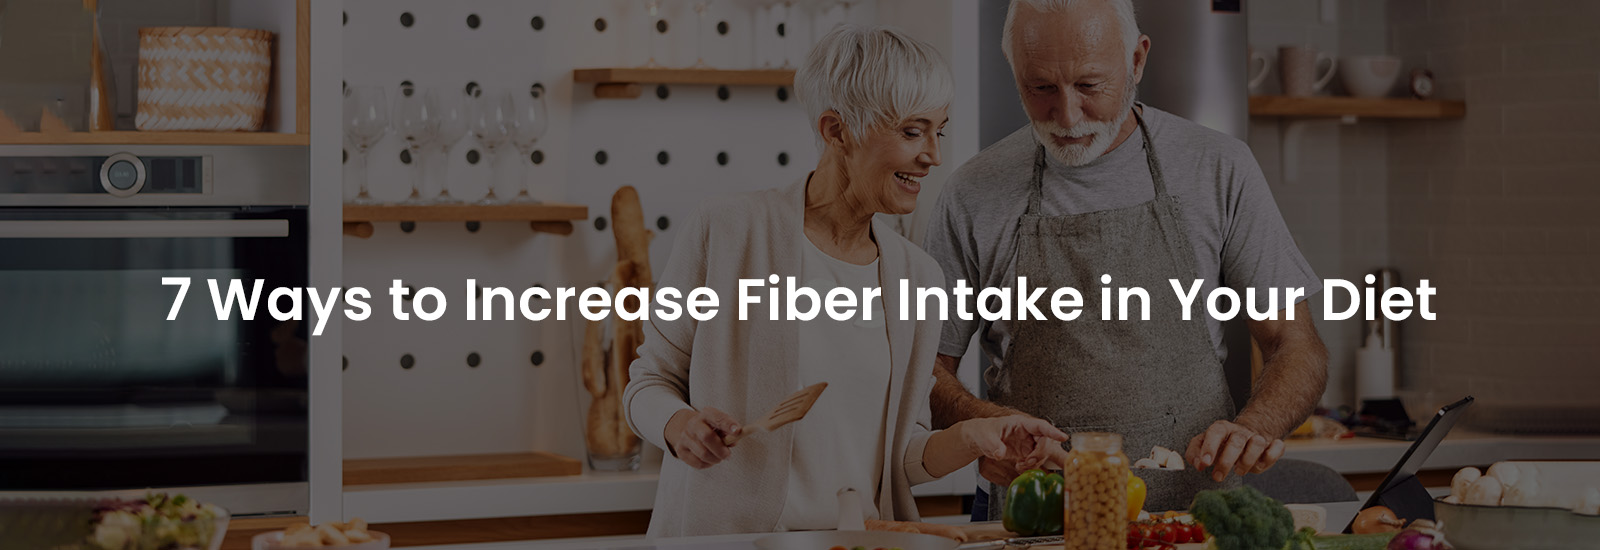 7 Ways to Increase Fiber Intake in Your Diet | Banner Image